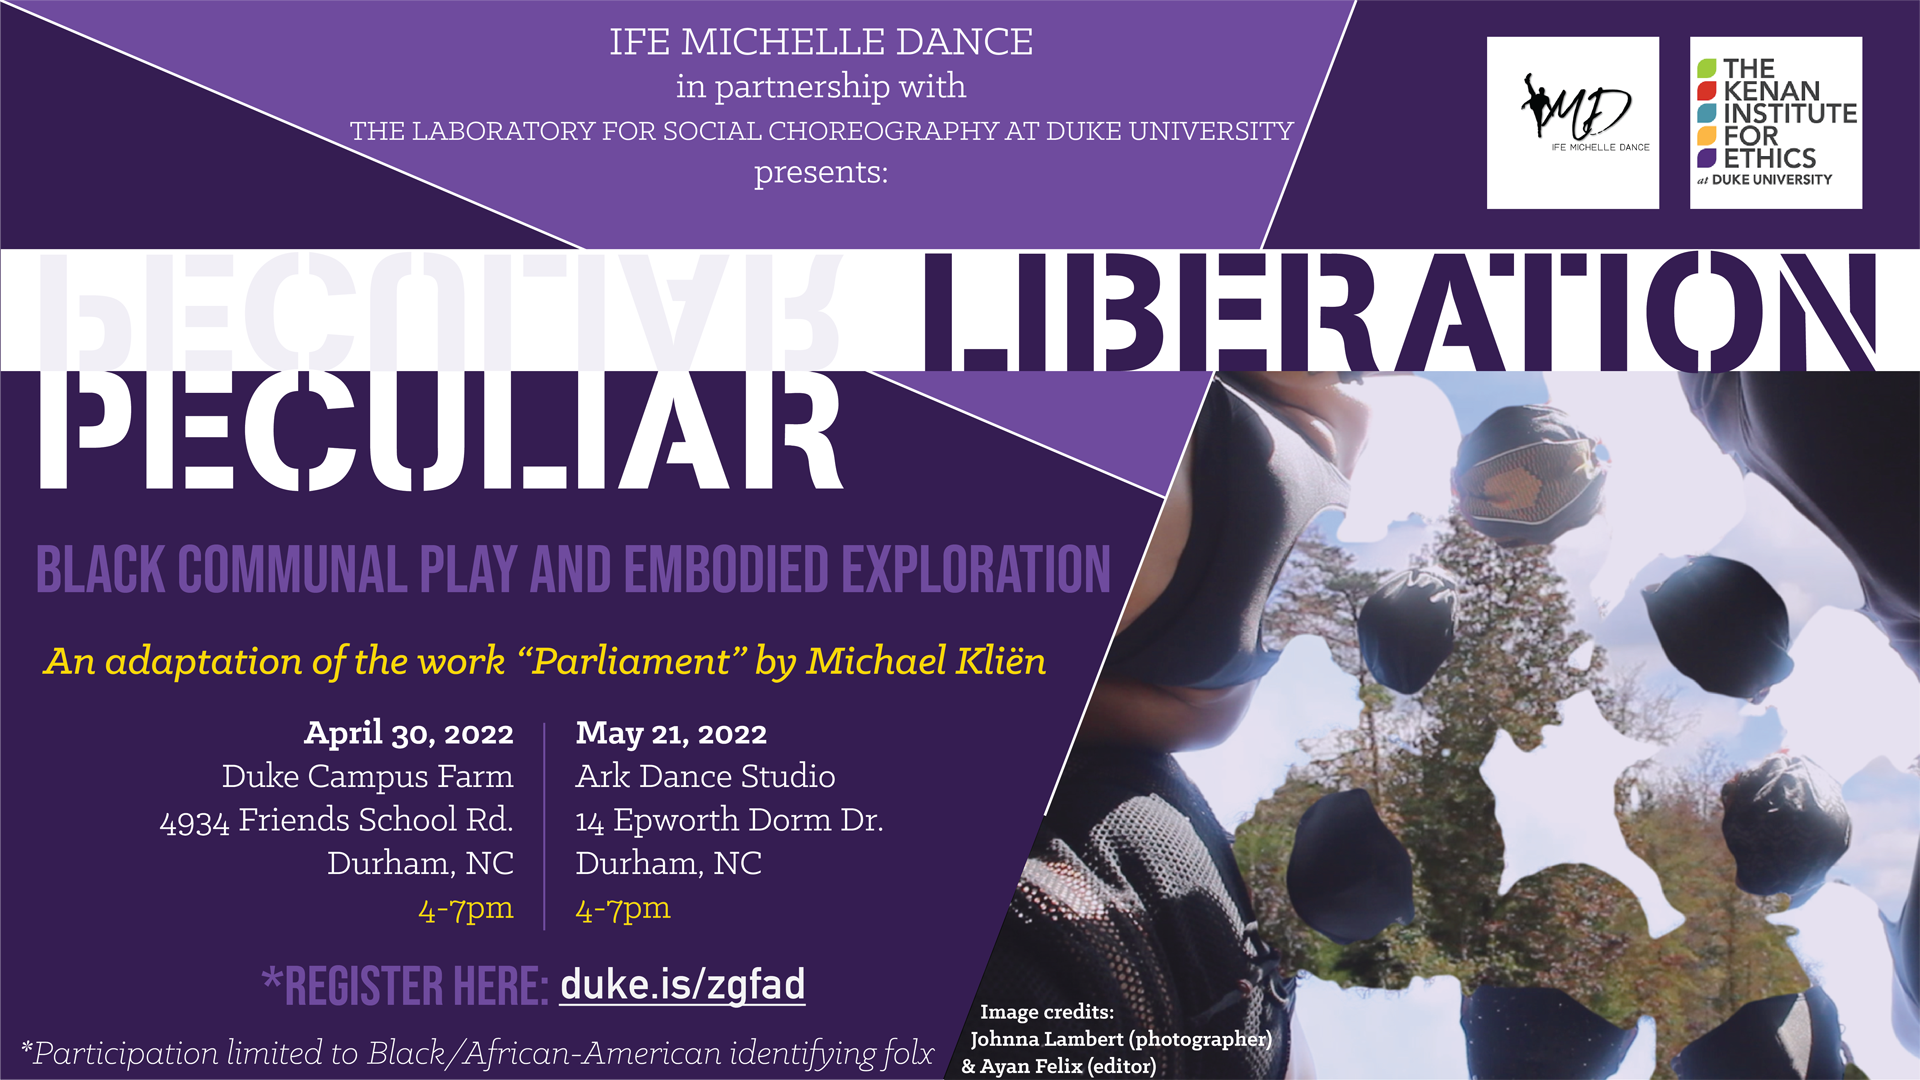 Ife Michelle Dance in partnership with the Laboratory for Social Choreography presents "Pecular Liberation" Black communal play and embodied exploration. An adaptation of the work "Parliament" by Michael Kliën. April 30, Duke Campus Farm, 4934 Friends School Rd, Durham, NC, 4-7pm. May 21, Ark Dance Studio, 14 Epworth Ln, Durham, NC, 4-7pm. Register here: duke.is/zgfad. *Participation limited to Black/African-American identifying folx.